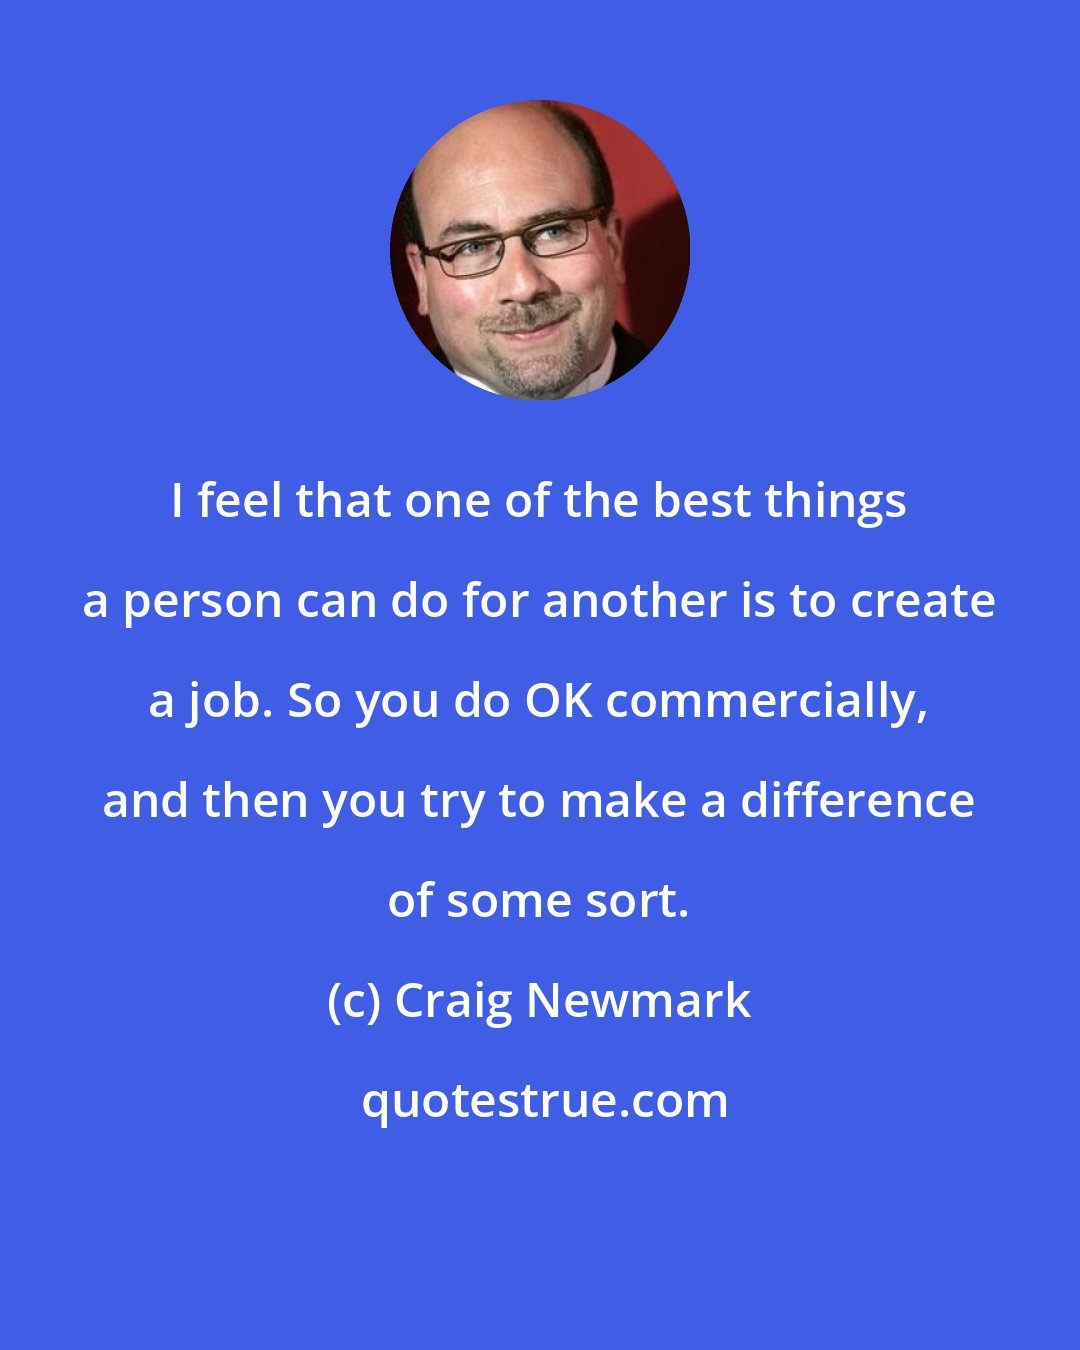 Craig Newmark: I feel that one of the best things a person can do for another is to create a job. So you do OK commercially, and then you try to make a difference of some sort.